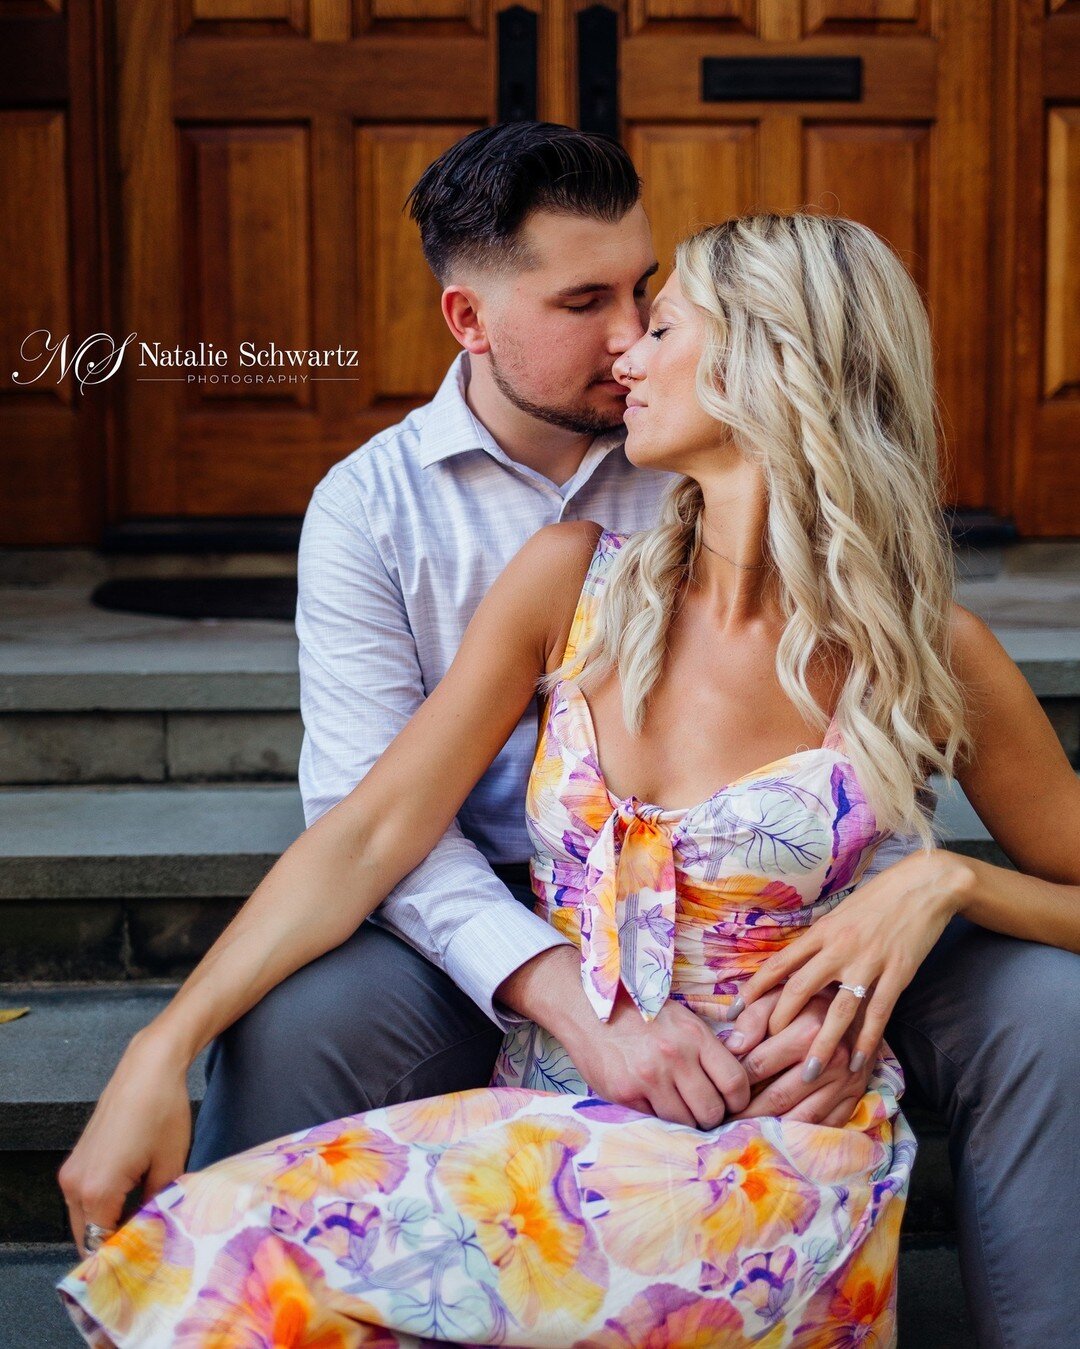 Marisa and Joey absolutely killed it at their engagement shoot this weekend in Charleston &lt;3